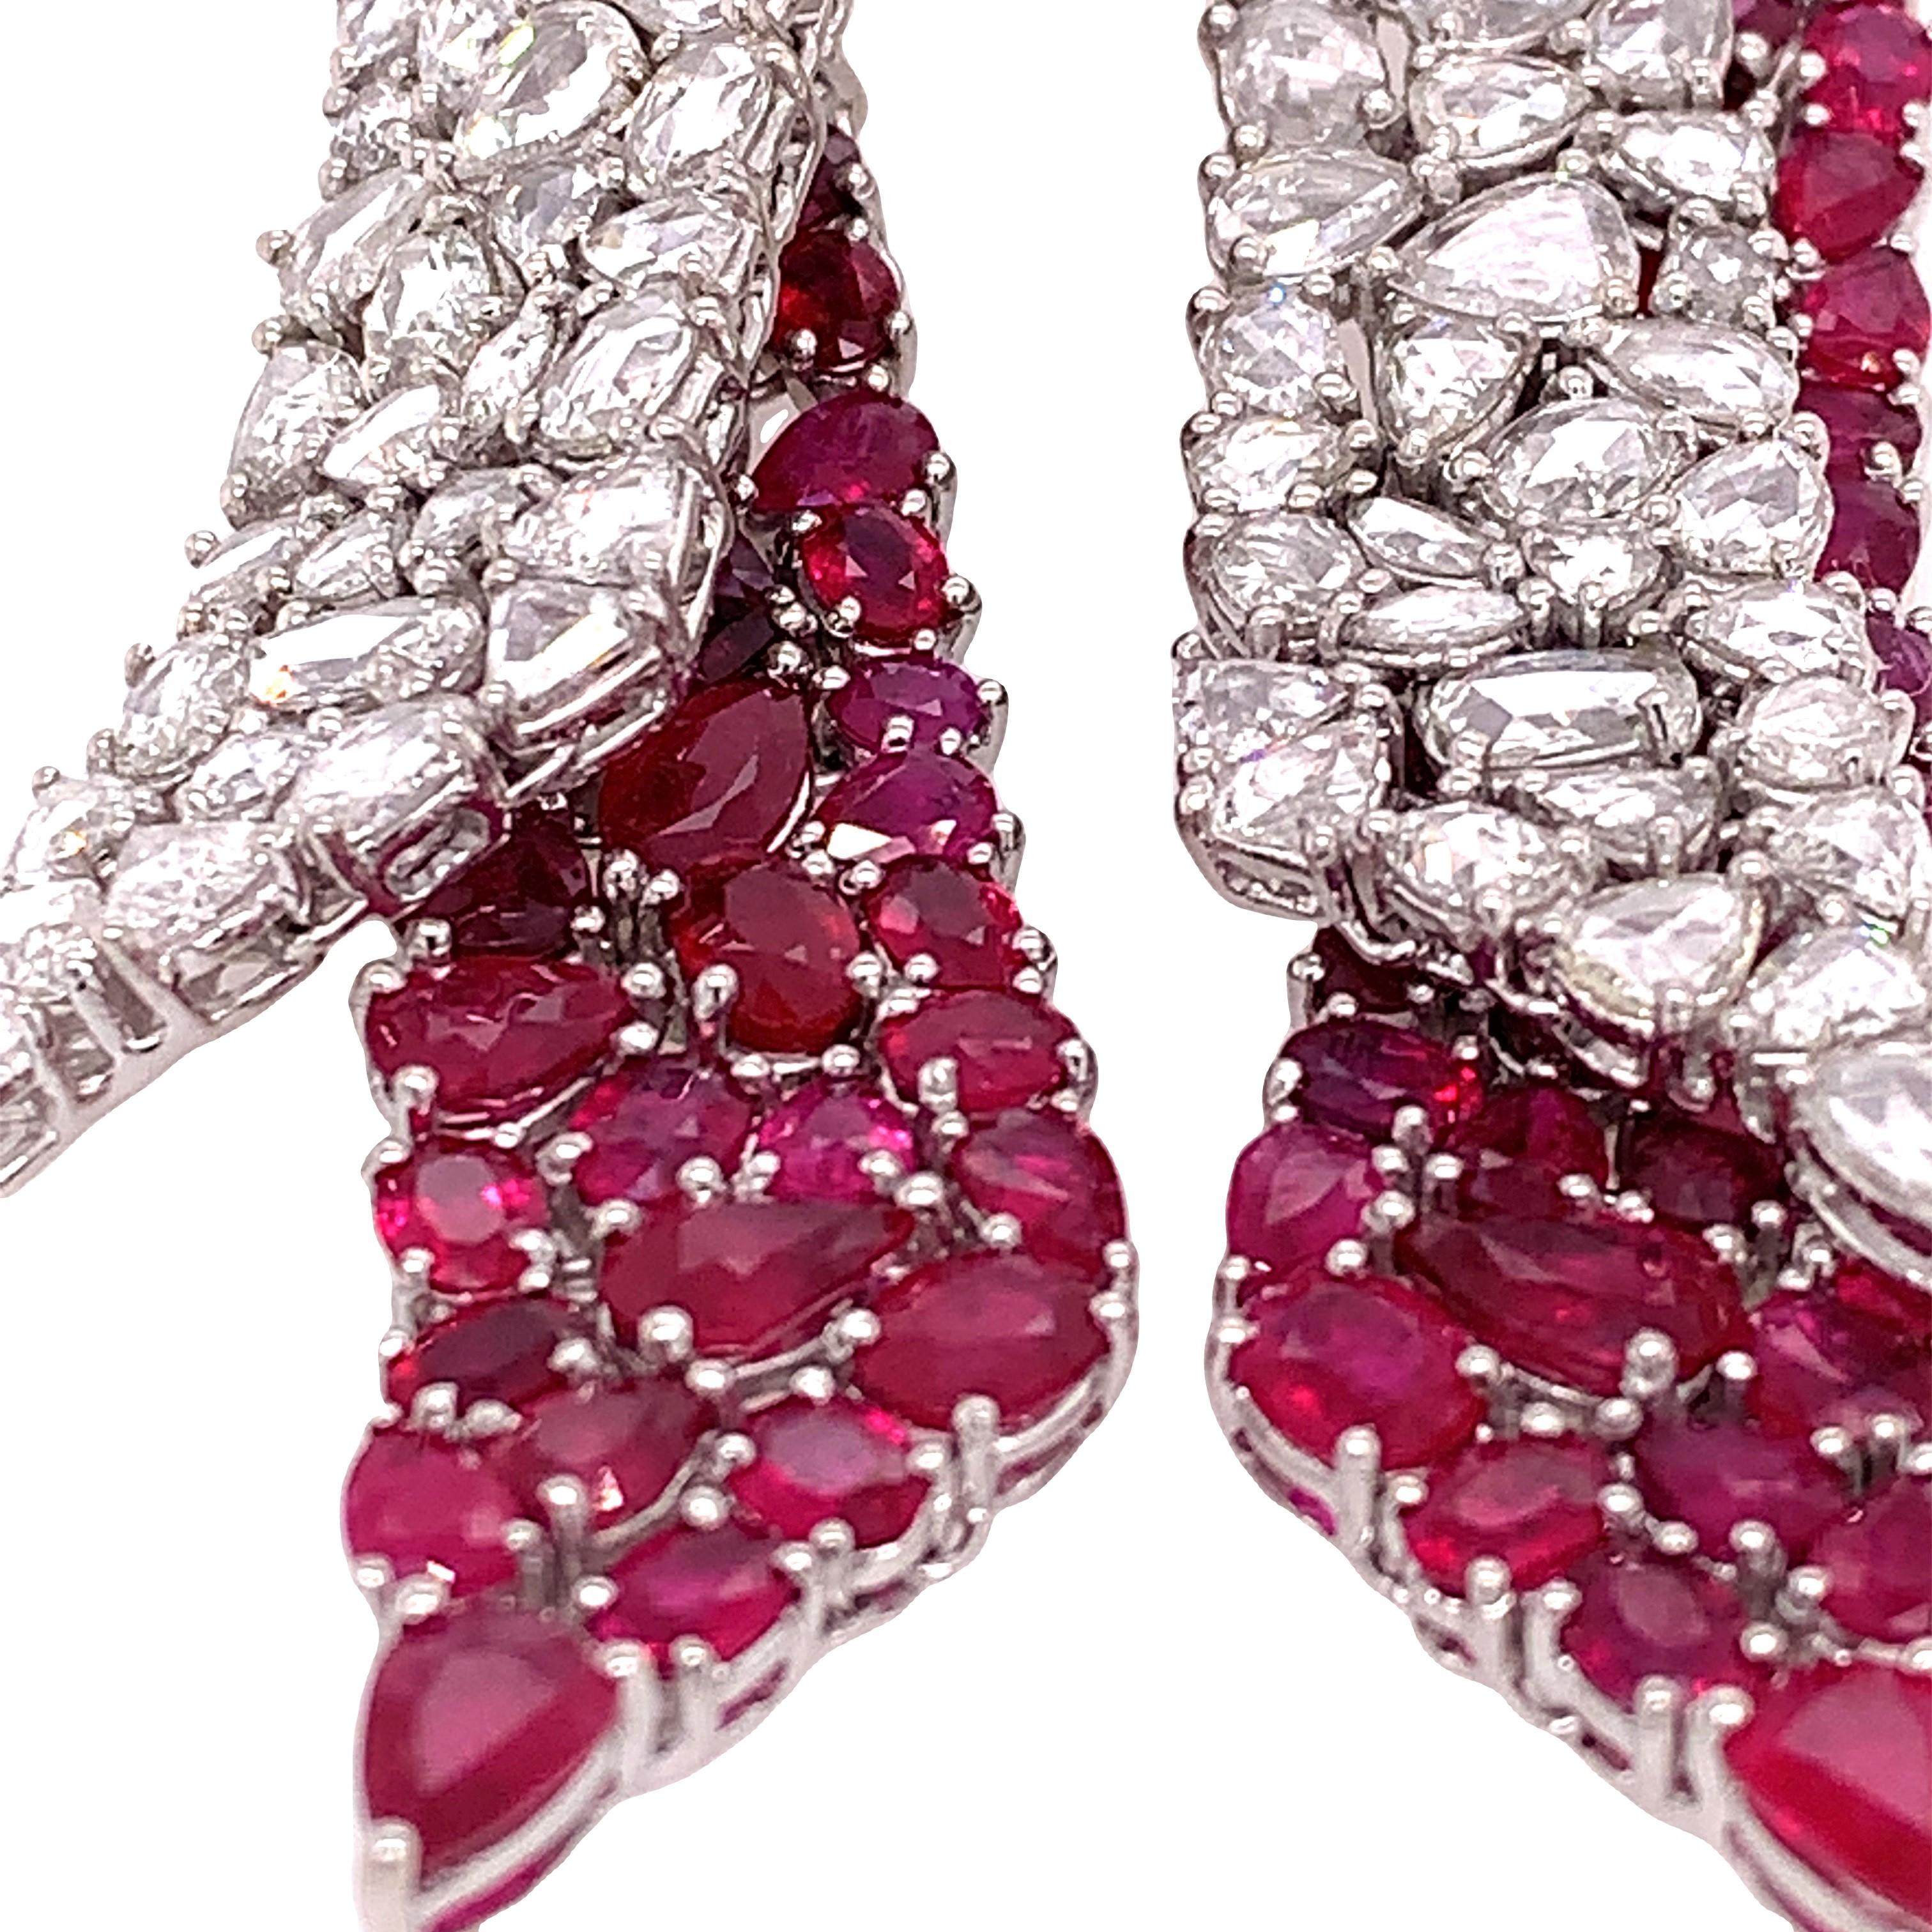 18K White Gold
Diamond: 8.01ct total weight
Ruby: 18.38ct total weight
All diamonds are G-H/SI stones.